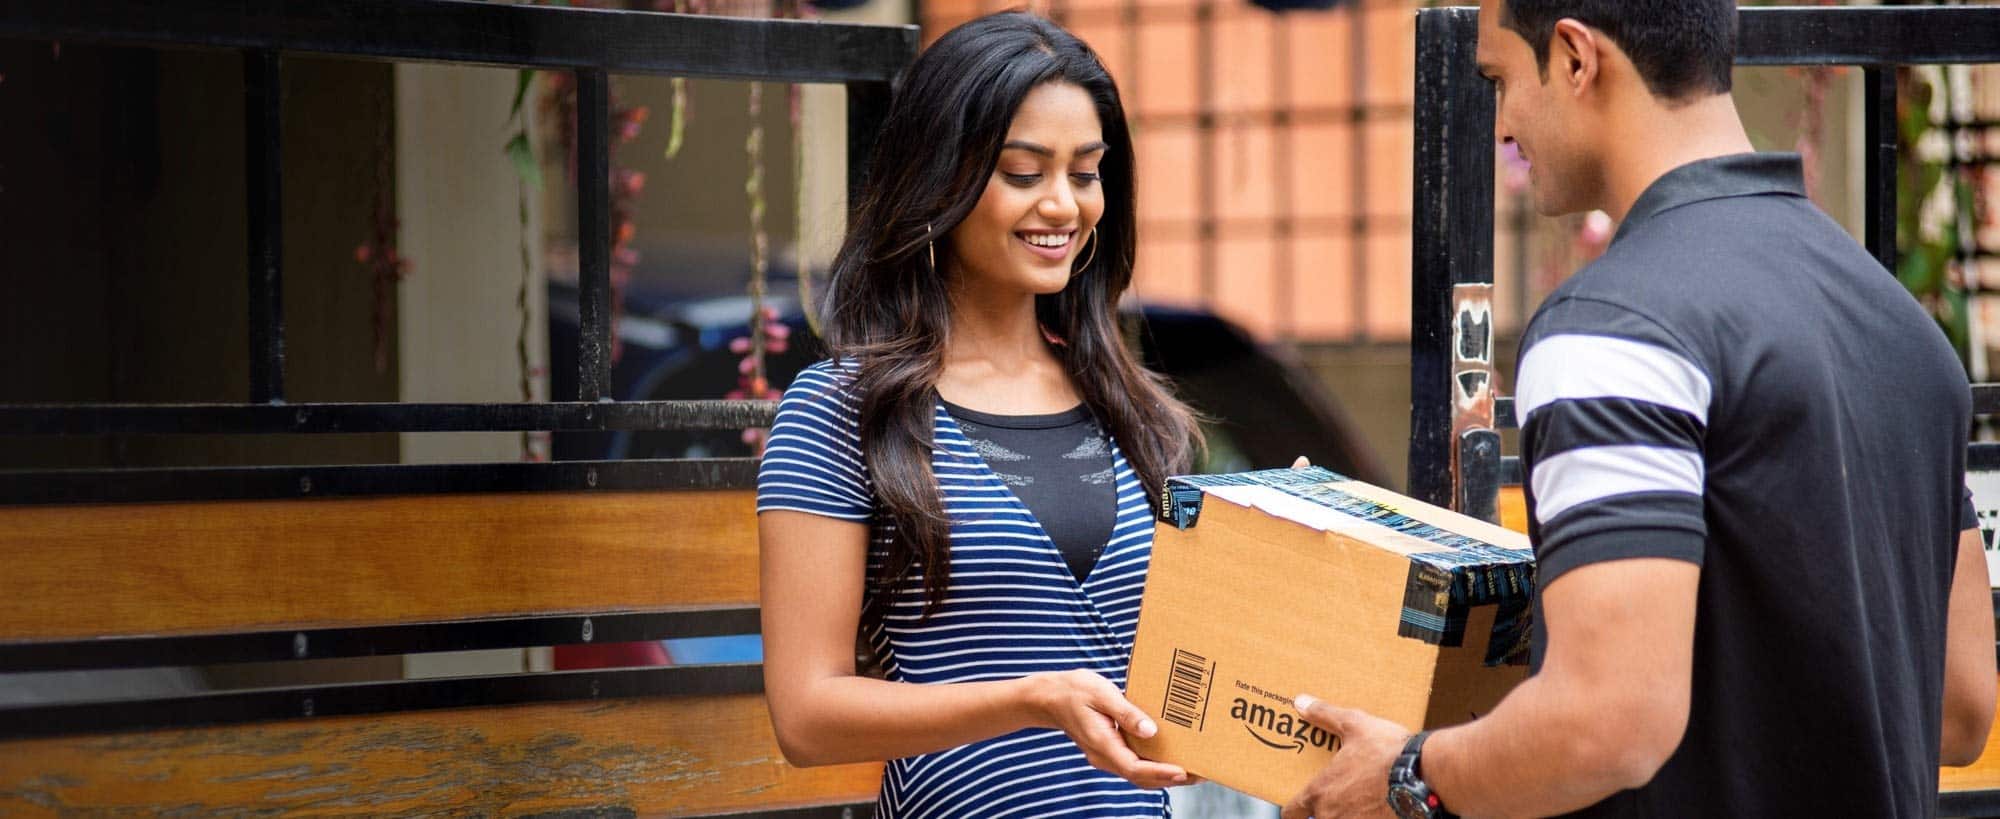 Amazon Flex Will Let You Make Extra Money Delivering Packages for Amazon India Part Time 2